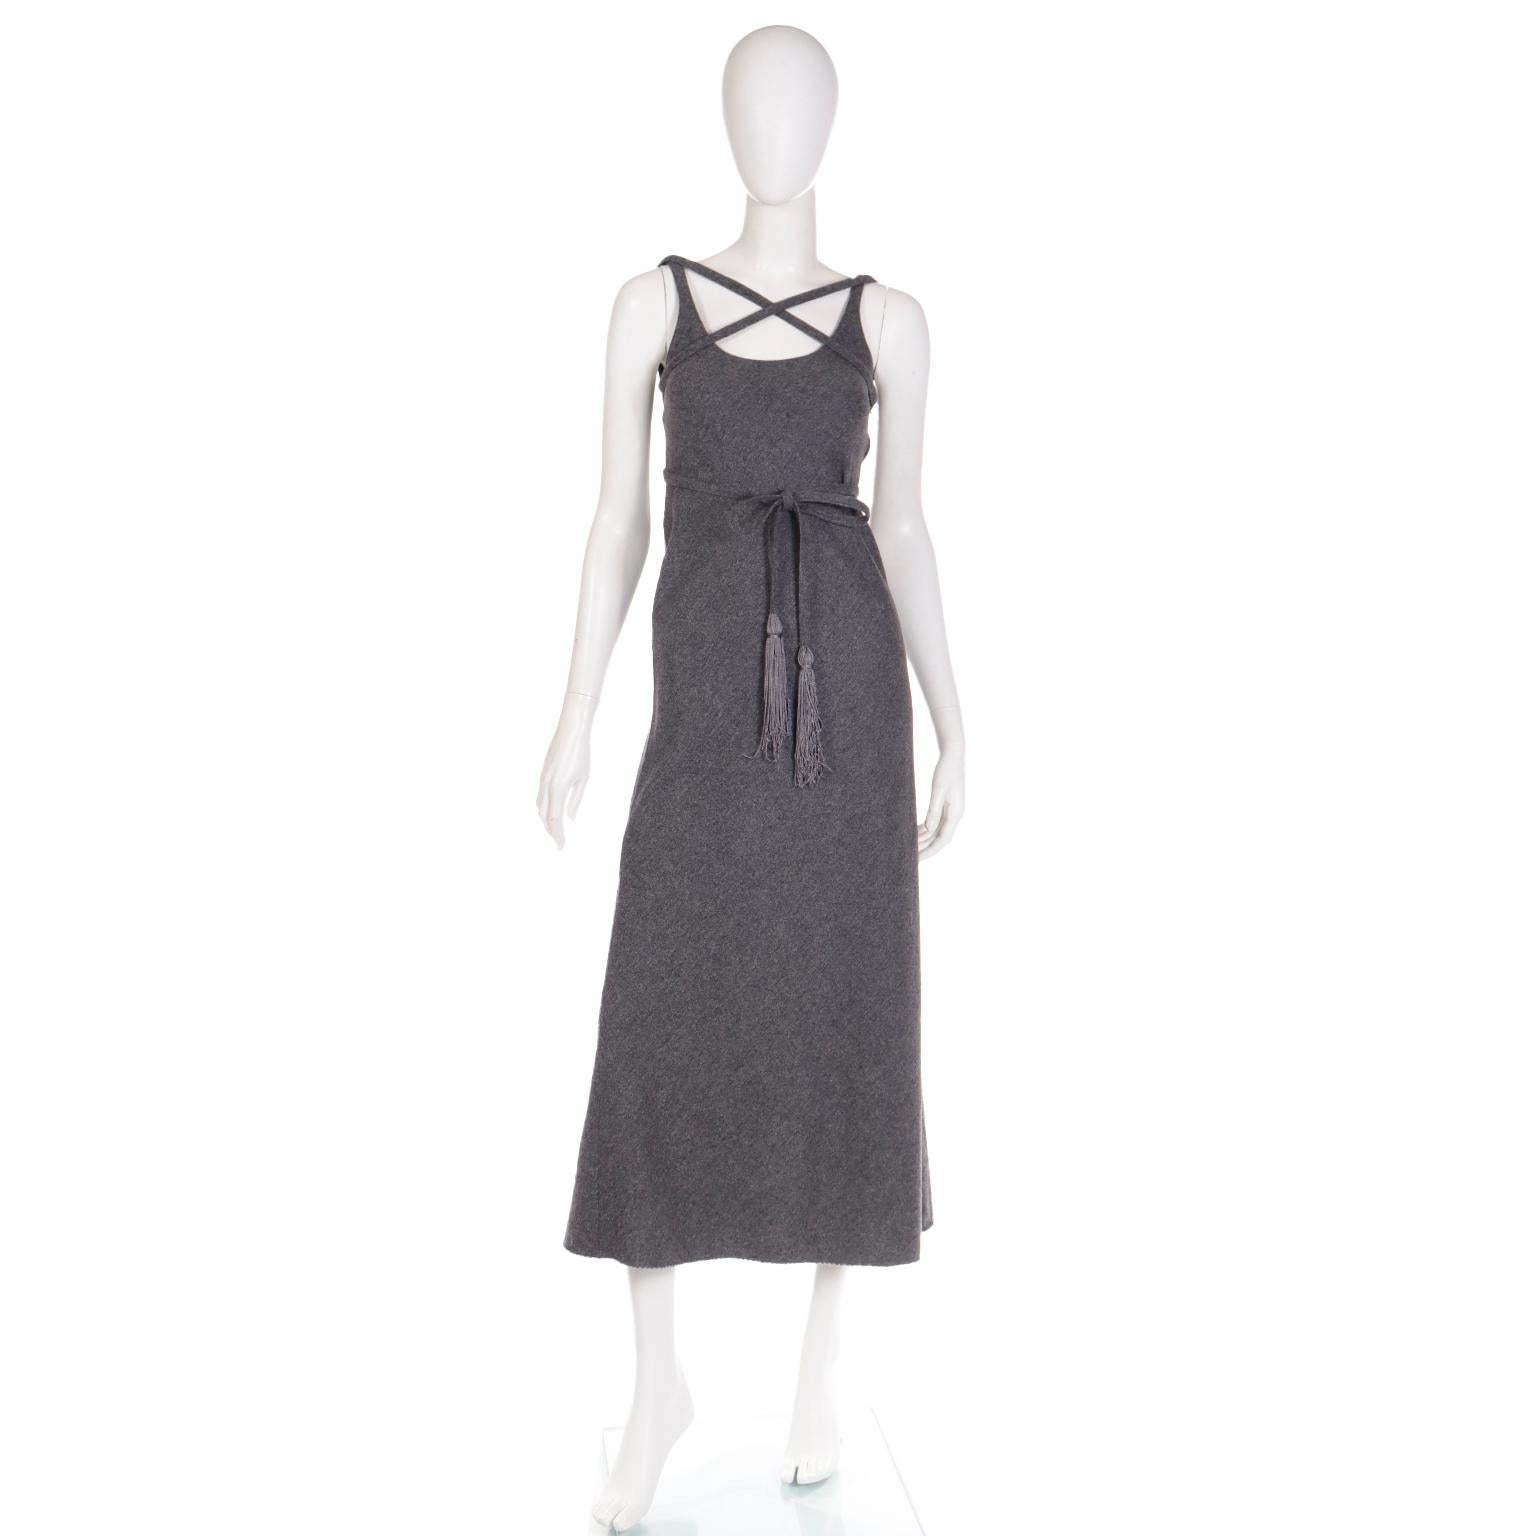 Leave it to Geoffrey Beene to make an otherwise simple grey wool dress so interesting and chic! This vintage late 1960's or early 1970's Geoffrey Beene dress has a long thin fabric belt that can be tied in numerous ways to create a variety of unique